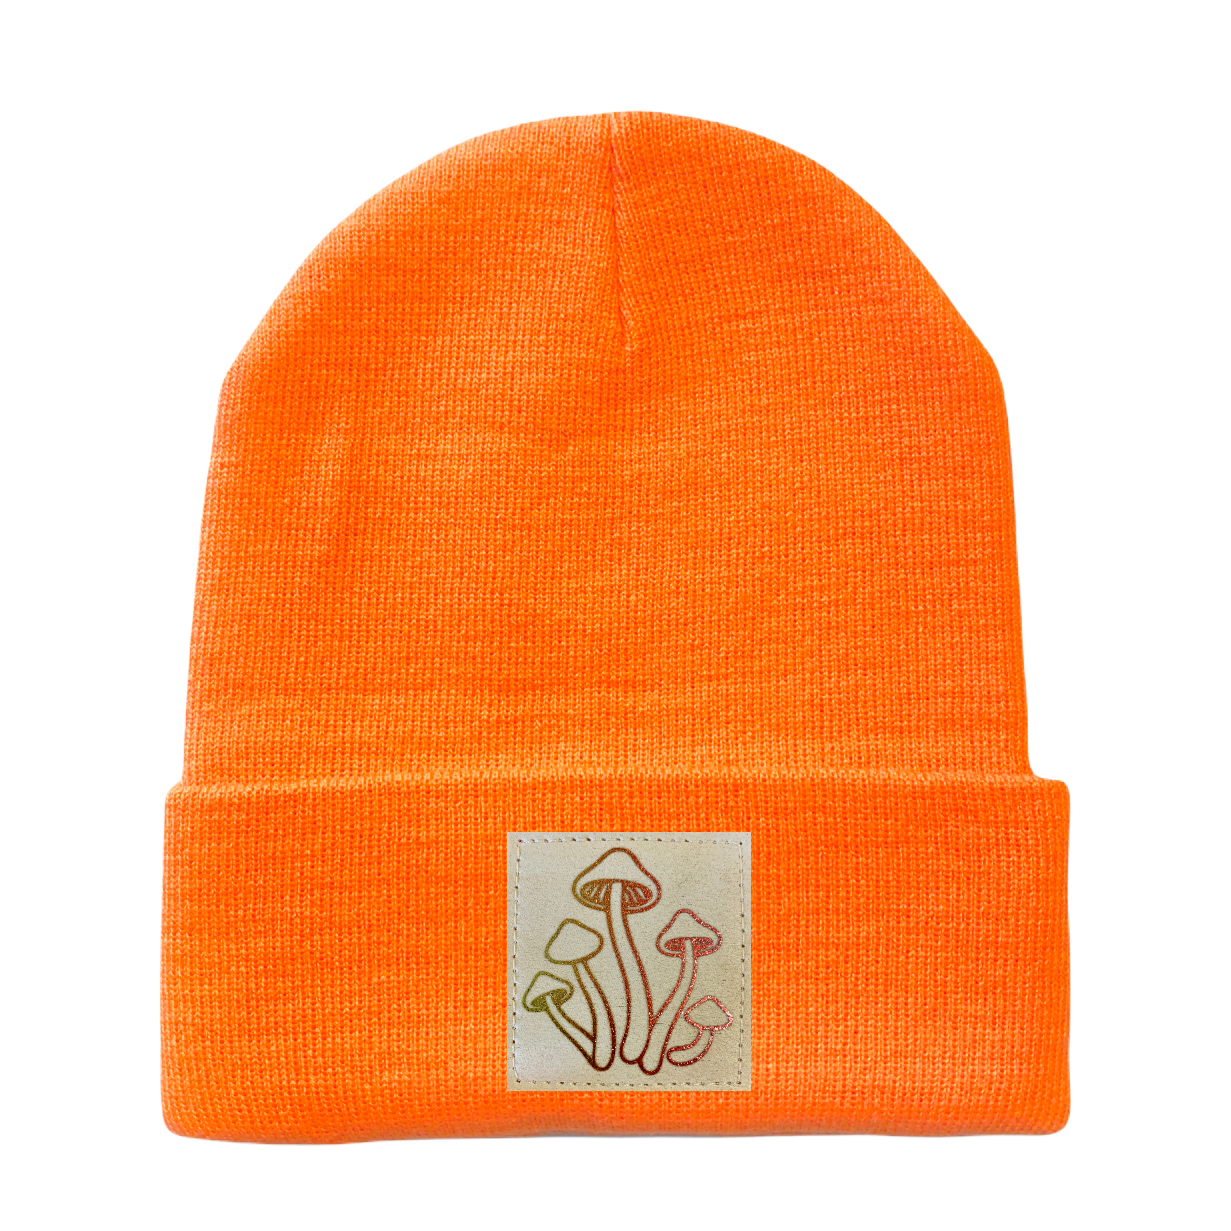 Neon Safety Orange Cuffed Beanie with Hand Made Vegan Leather Holographic Mushroom Patch over your Third eye, plant medicine yoga hat by Buddha Gear 